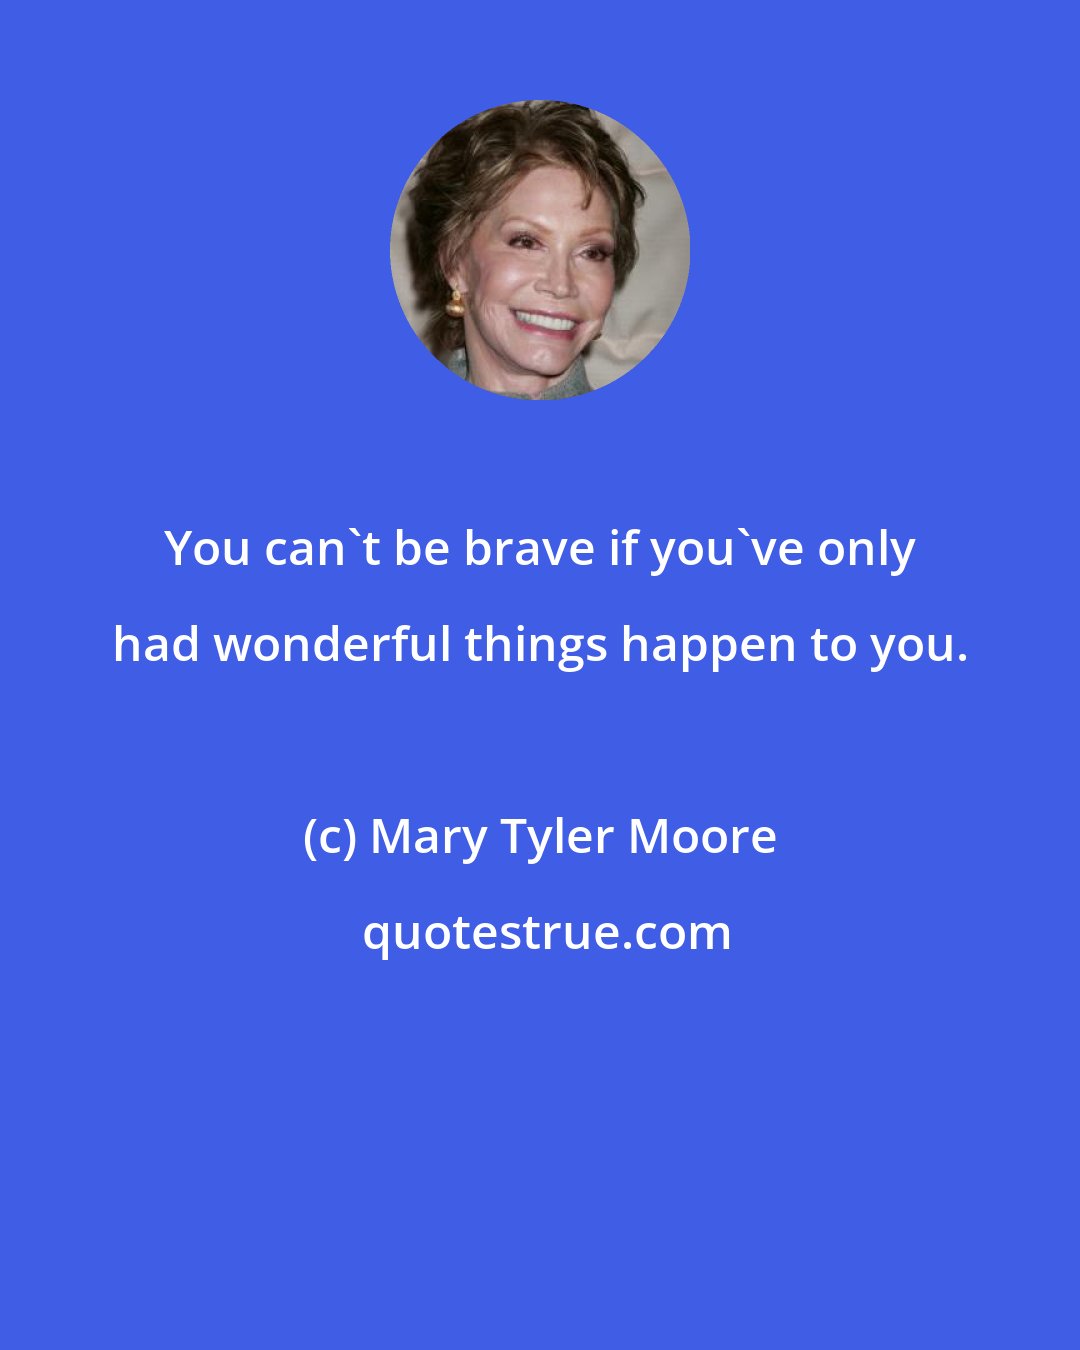 Mary Tyler Moore: You can't be brave if you've only had wonderful things happen to you.